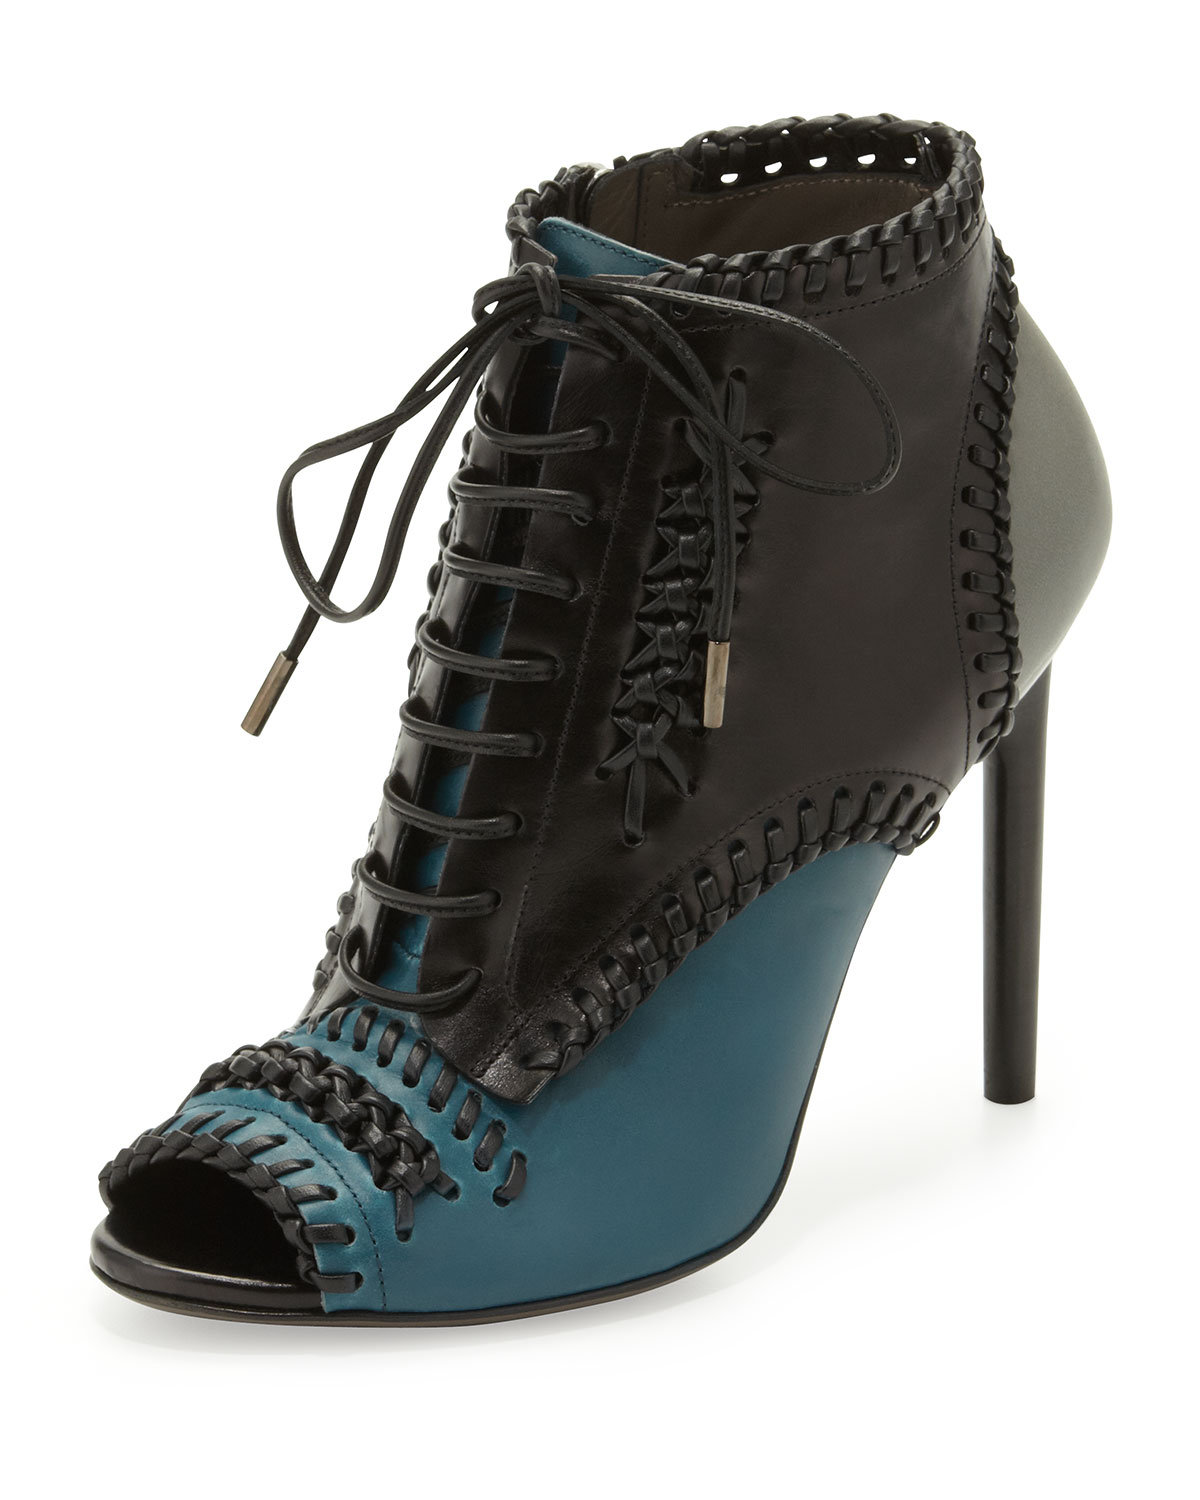 15 Lace-Up Shoes for Fall 2014 - theFashionSpot